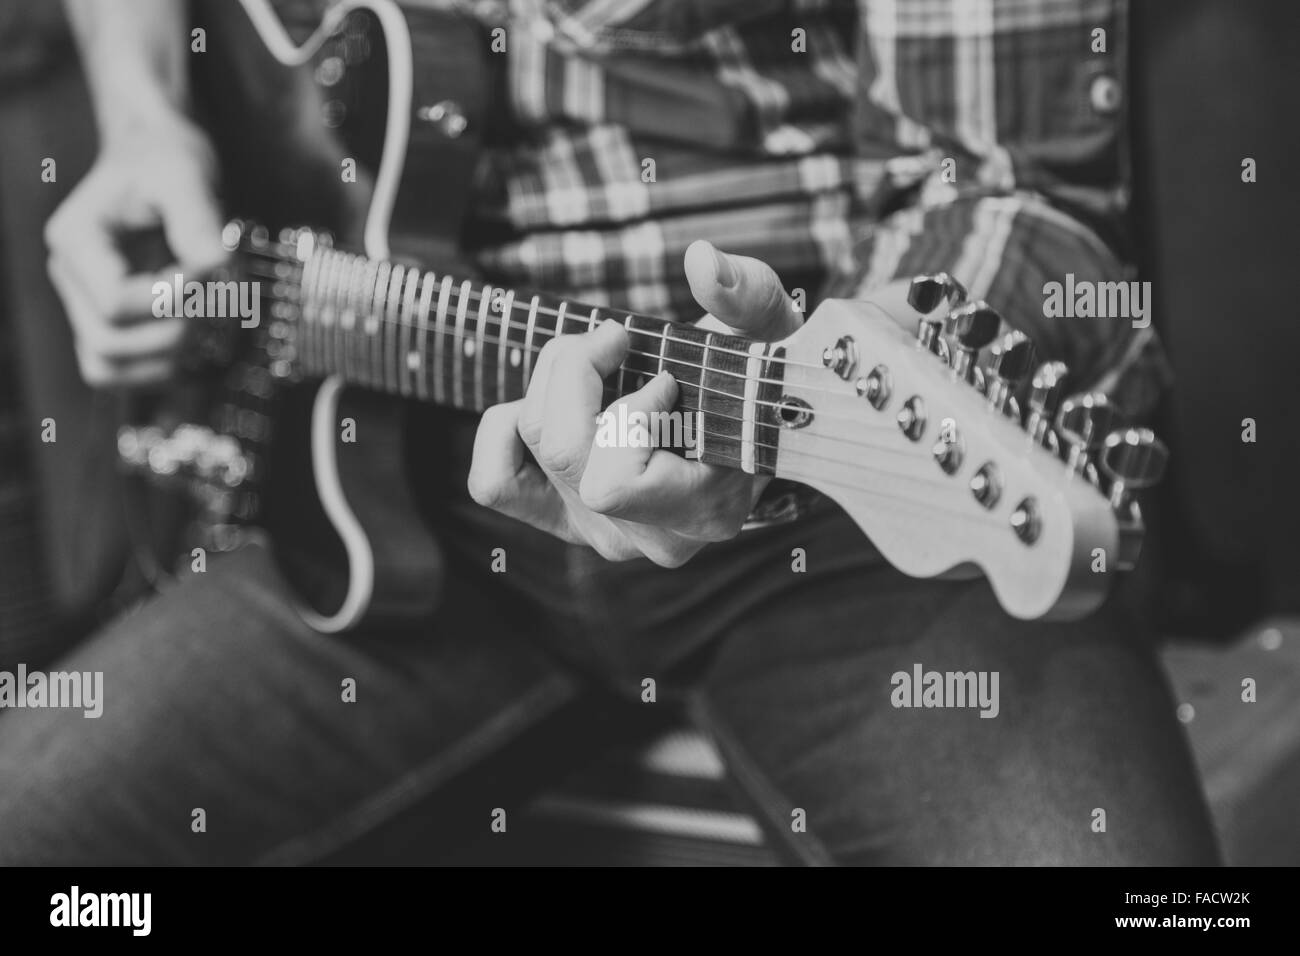 Close up view of man's hands playing electric guitar. Stock Photo